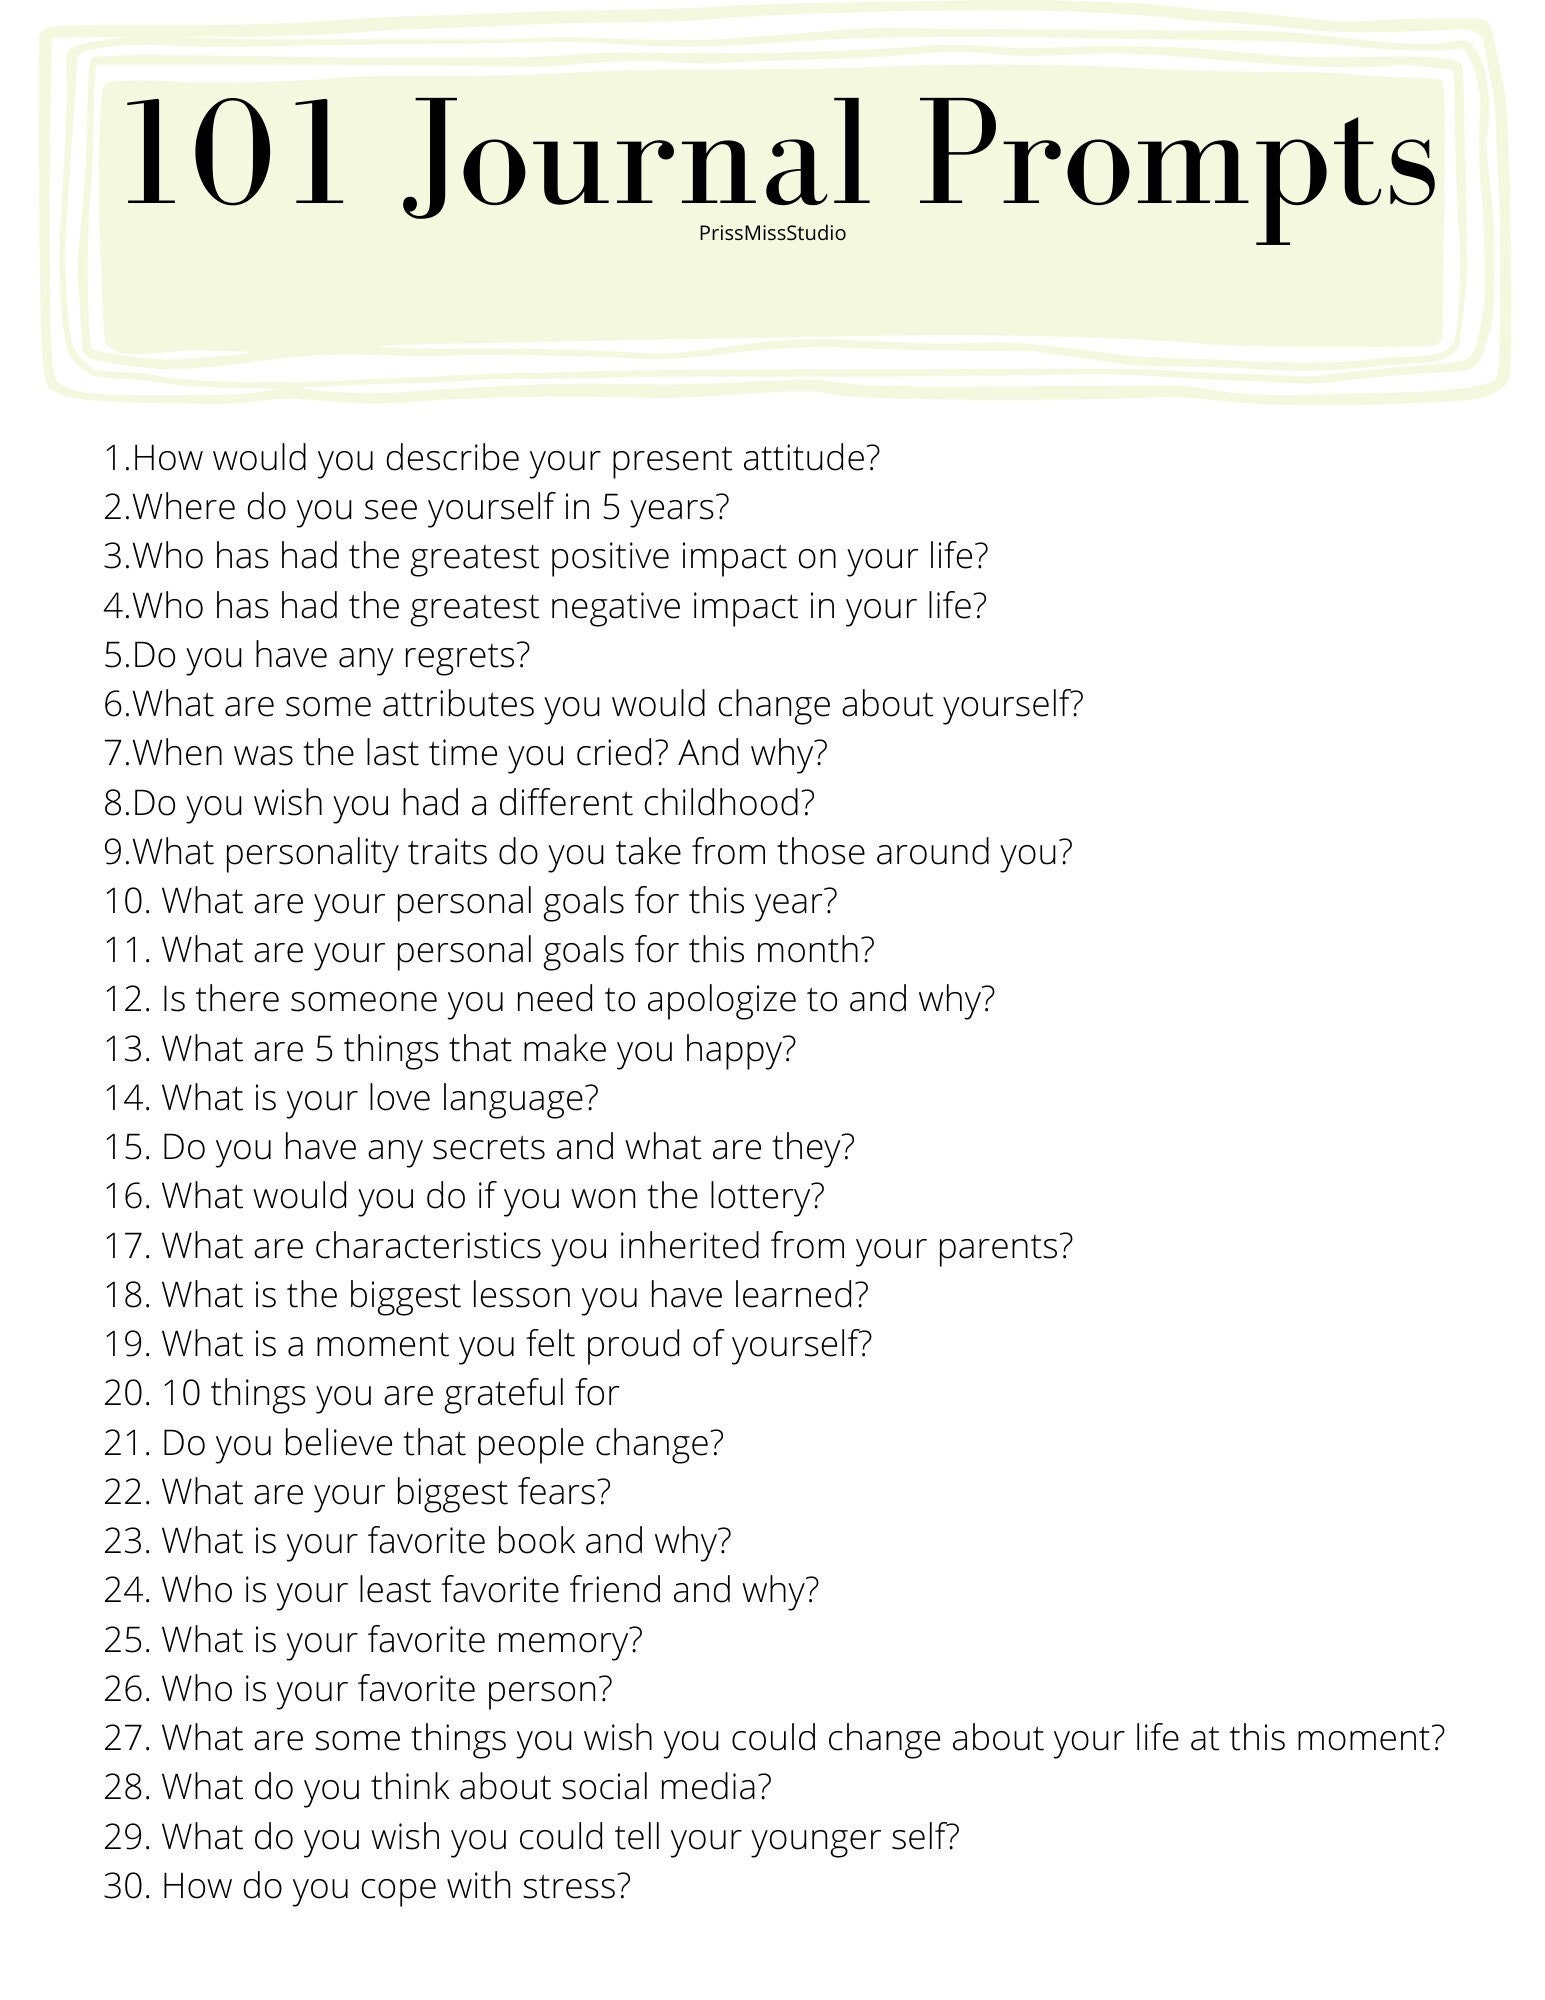 101 JOURNAL PROMPTS Digital Link, Ready for Download - Etsy